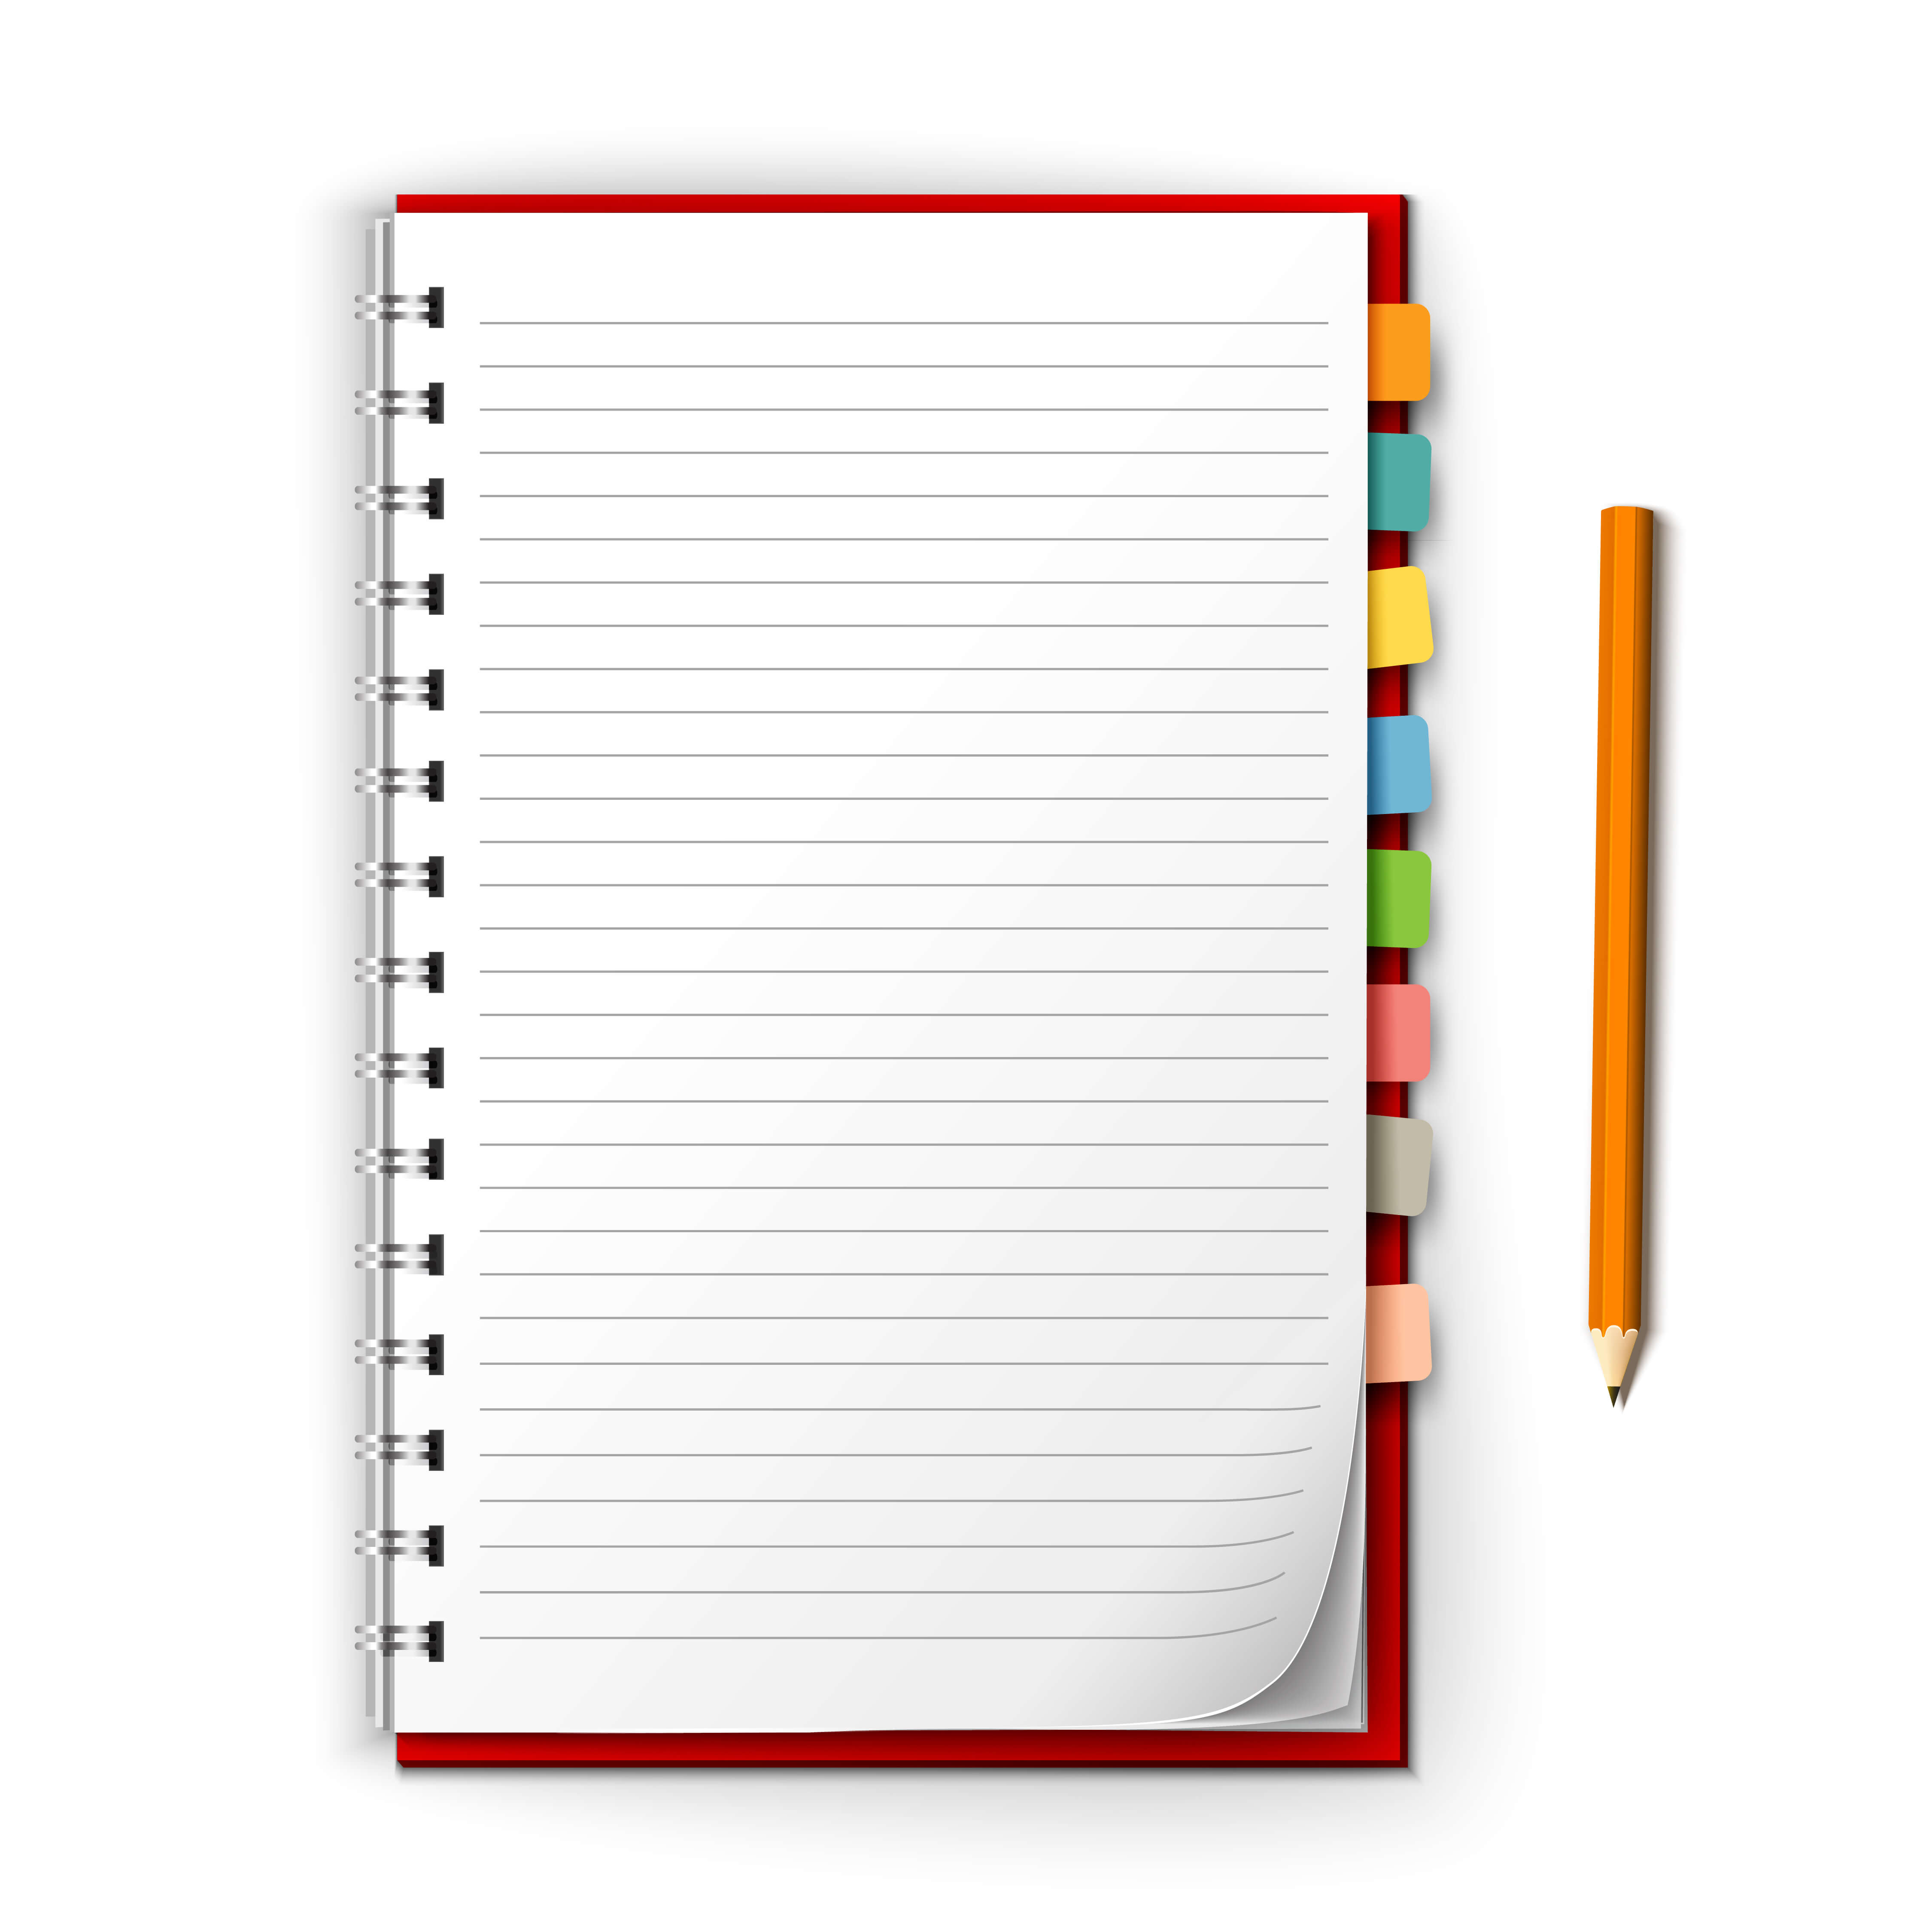 Realistic white lined notepad with bookmark reminders and pencil isolated on white background vector illustration